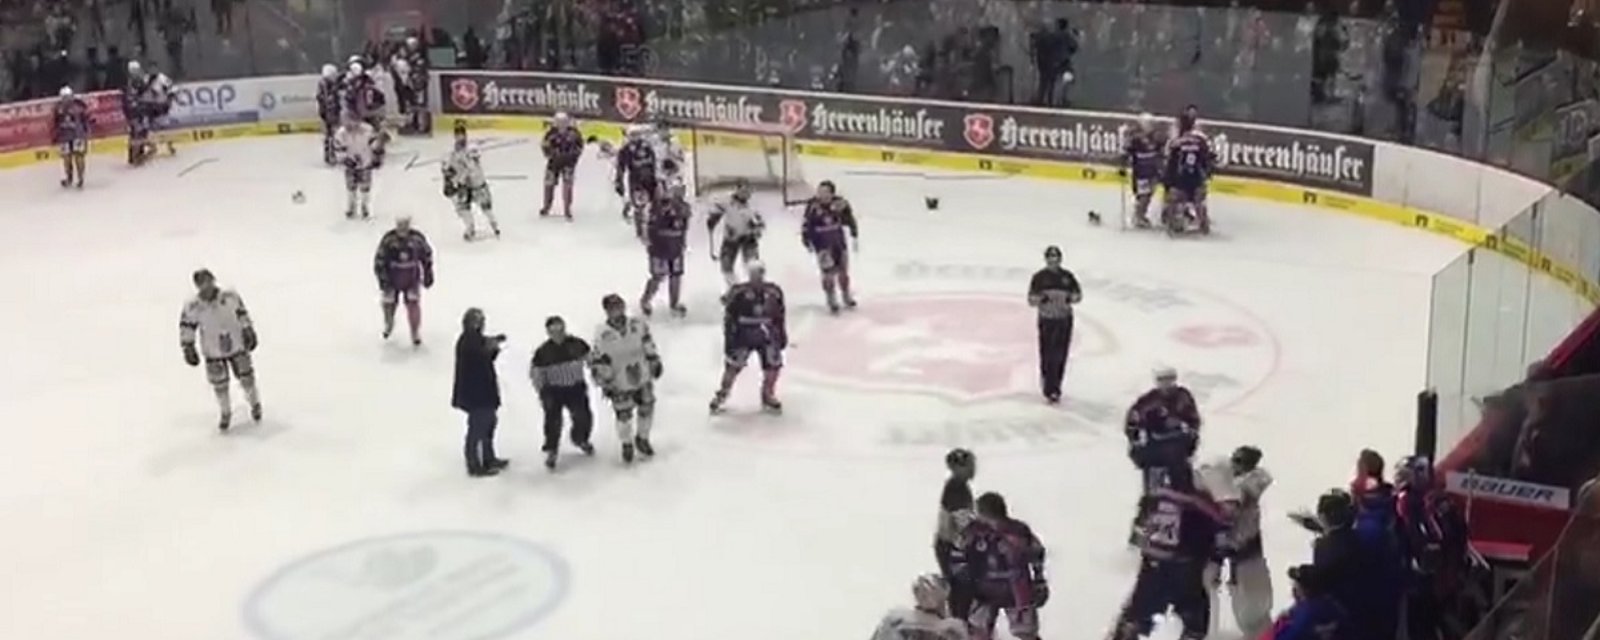 Players, backup goalies, and even the coaches clear the bench in huge brawl!